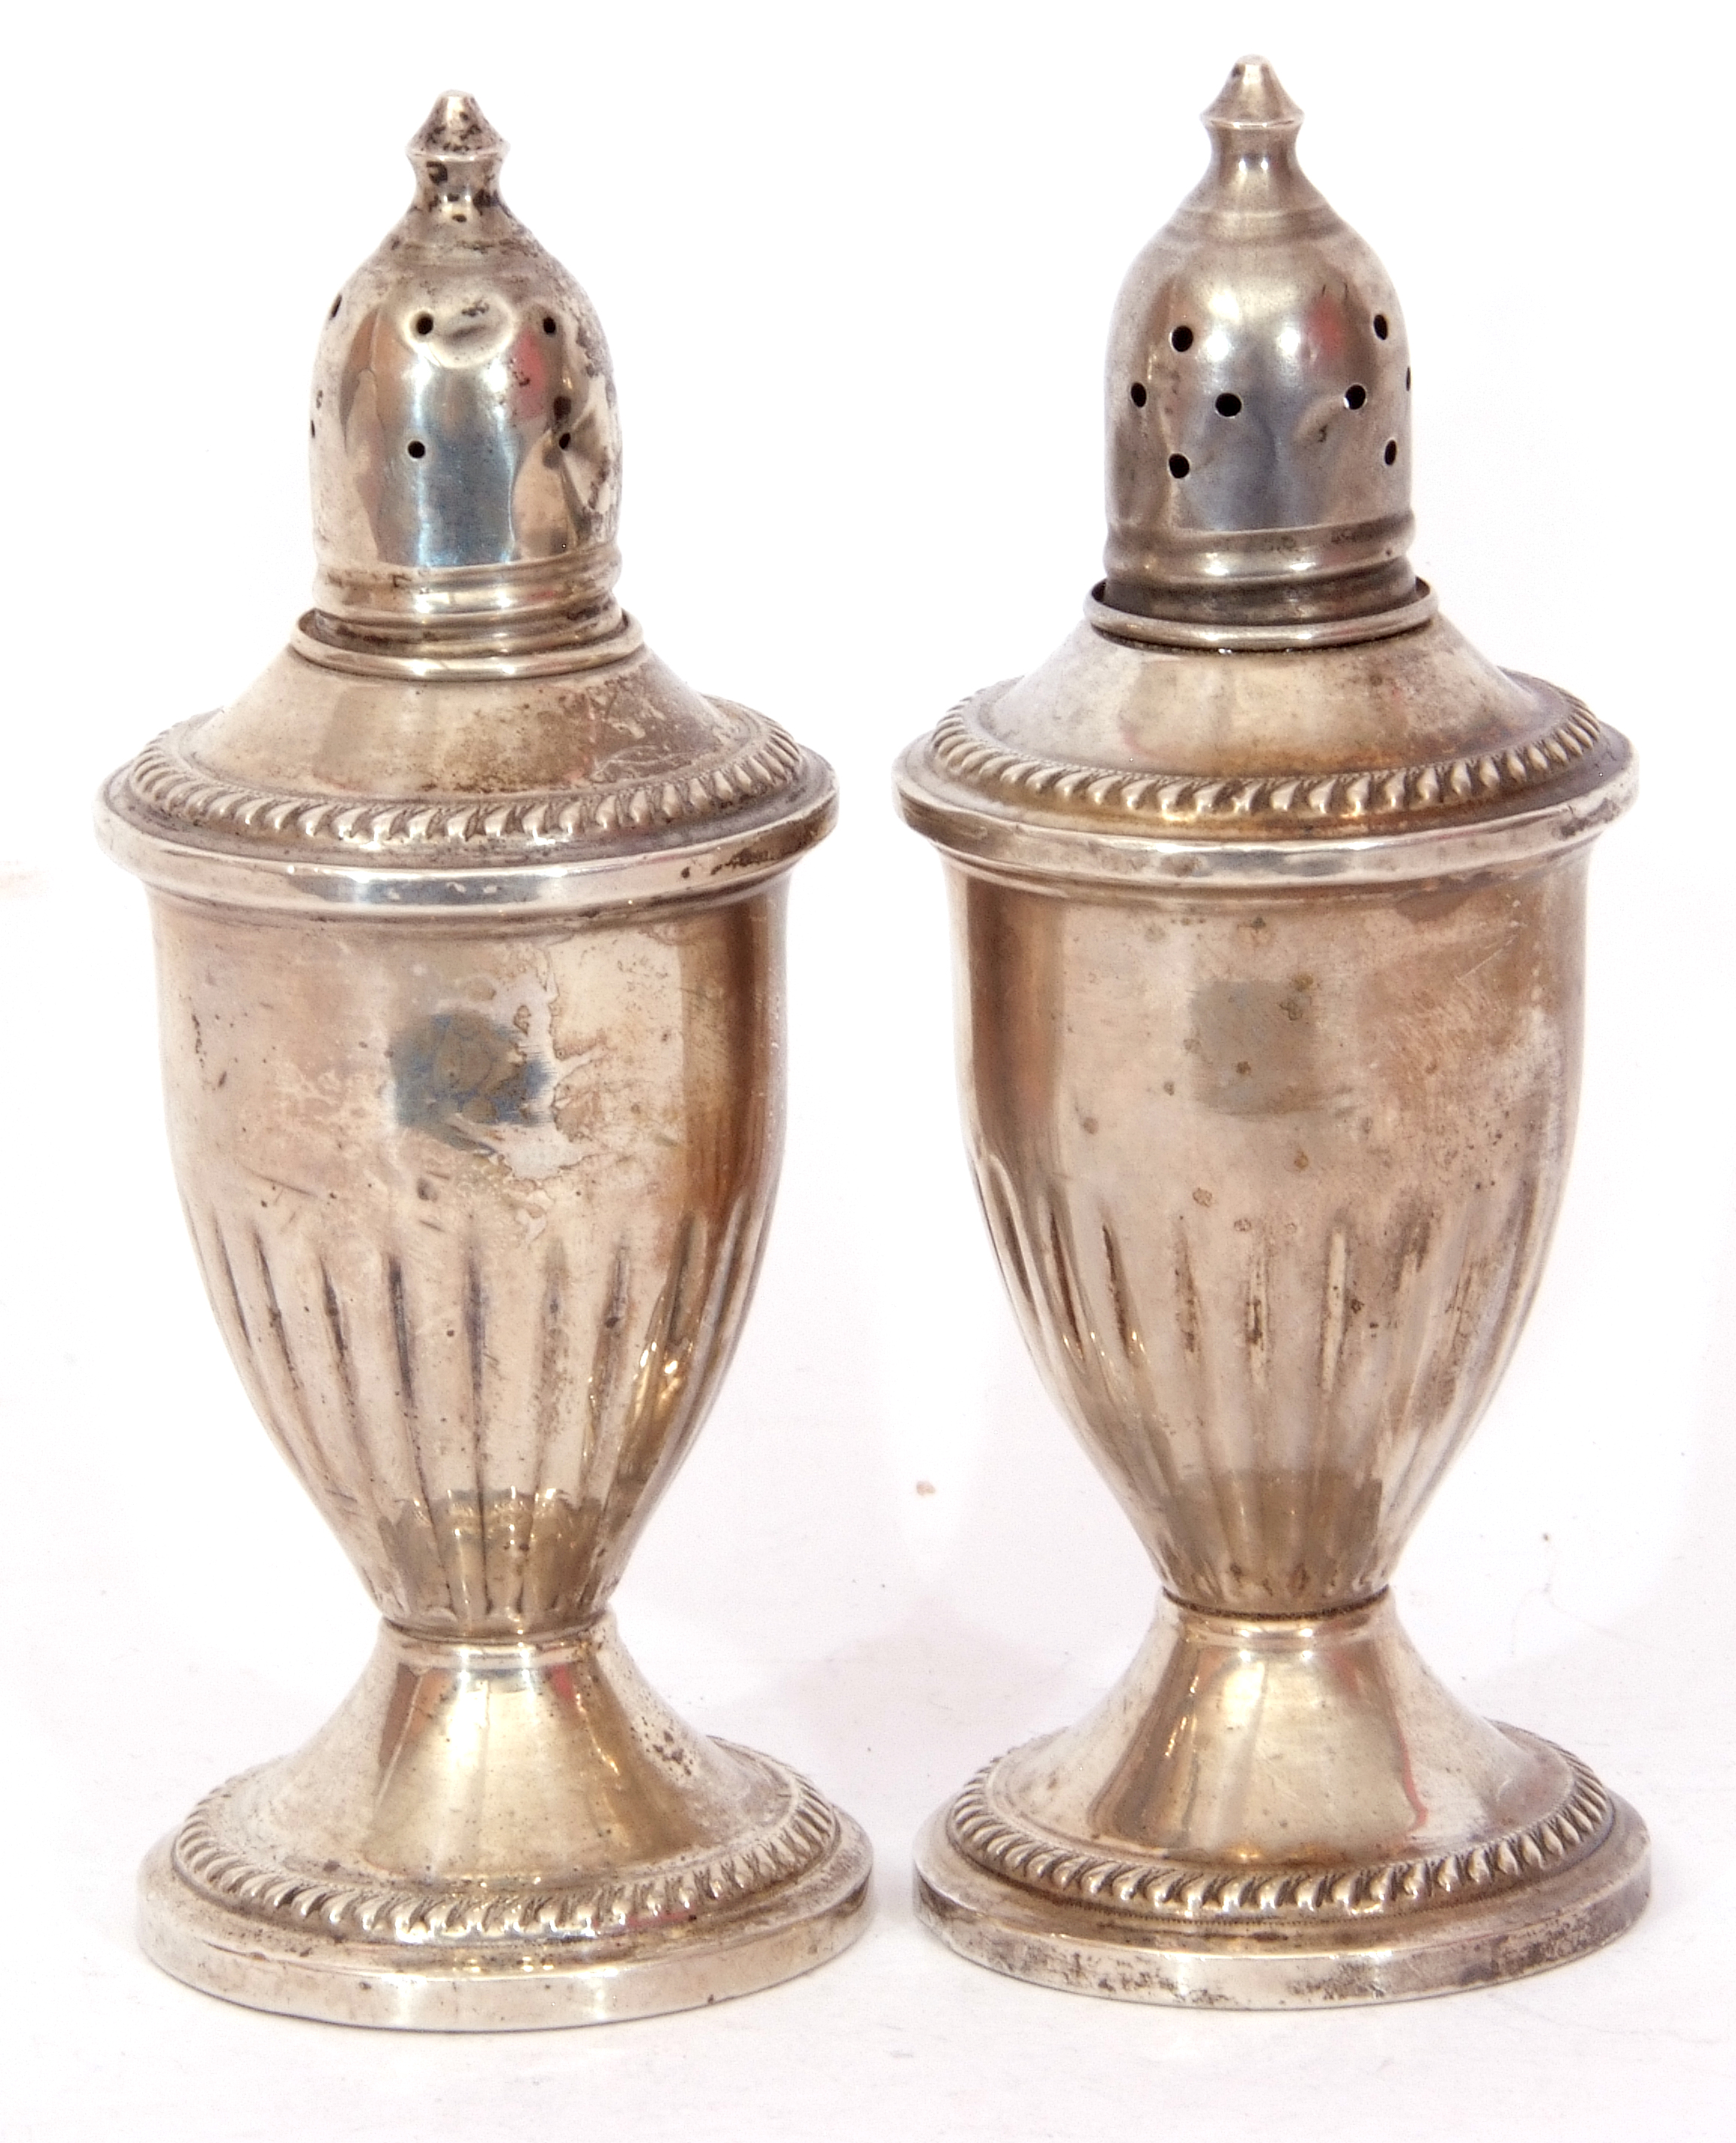 Pair of antique silver loaded peppers of vase form, pierced detachable tops, half fluted bodies, - Image 2 of 2